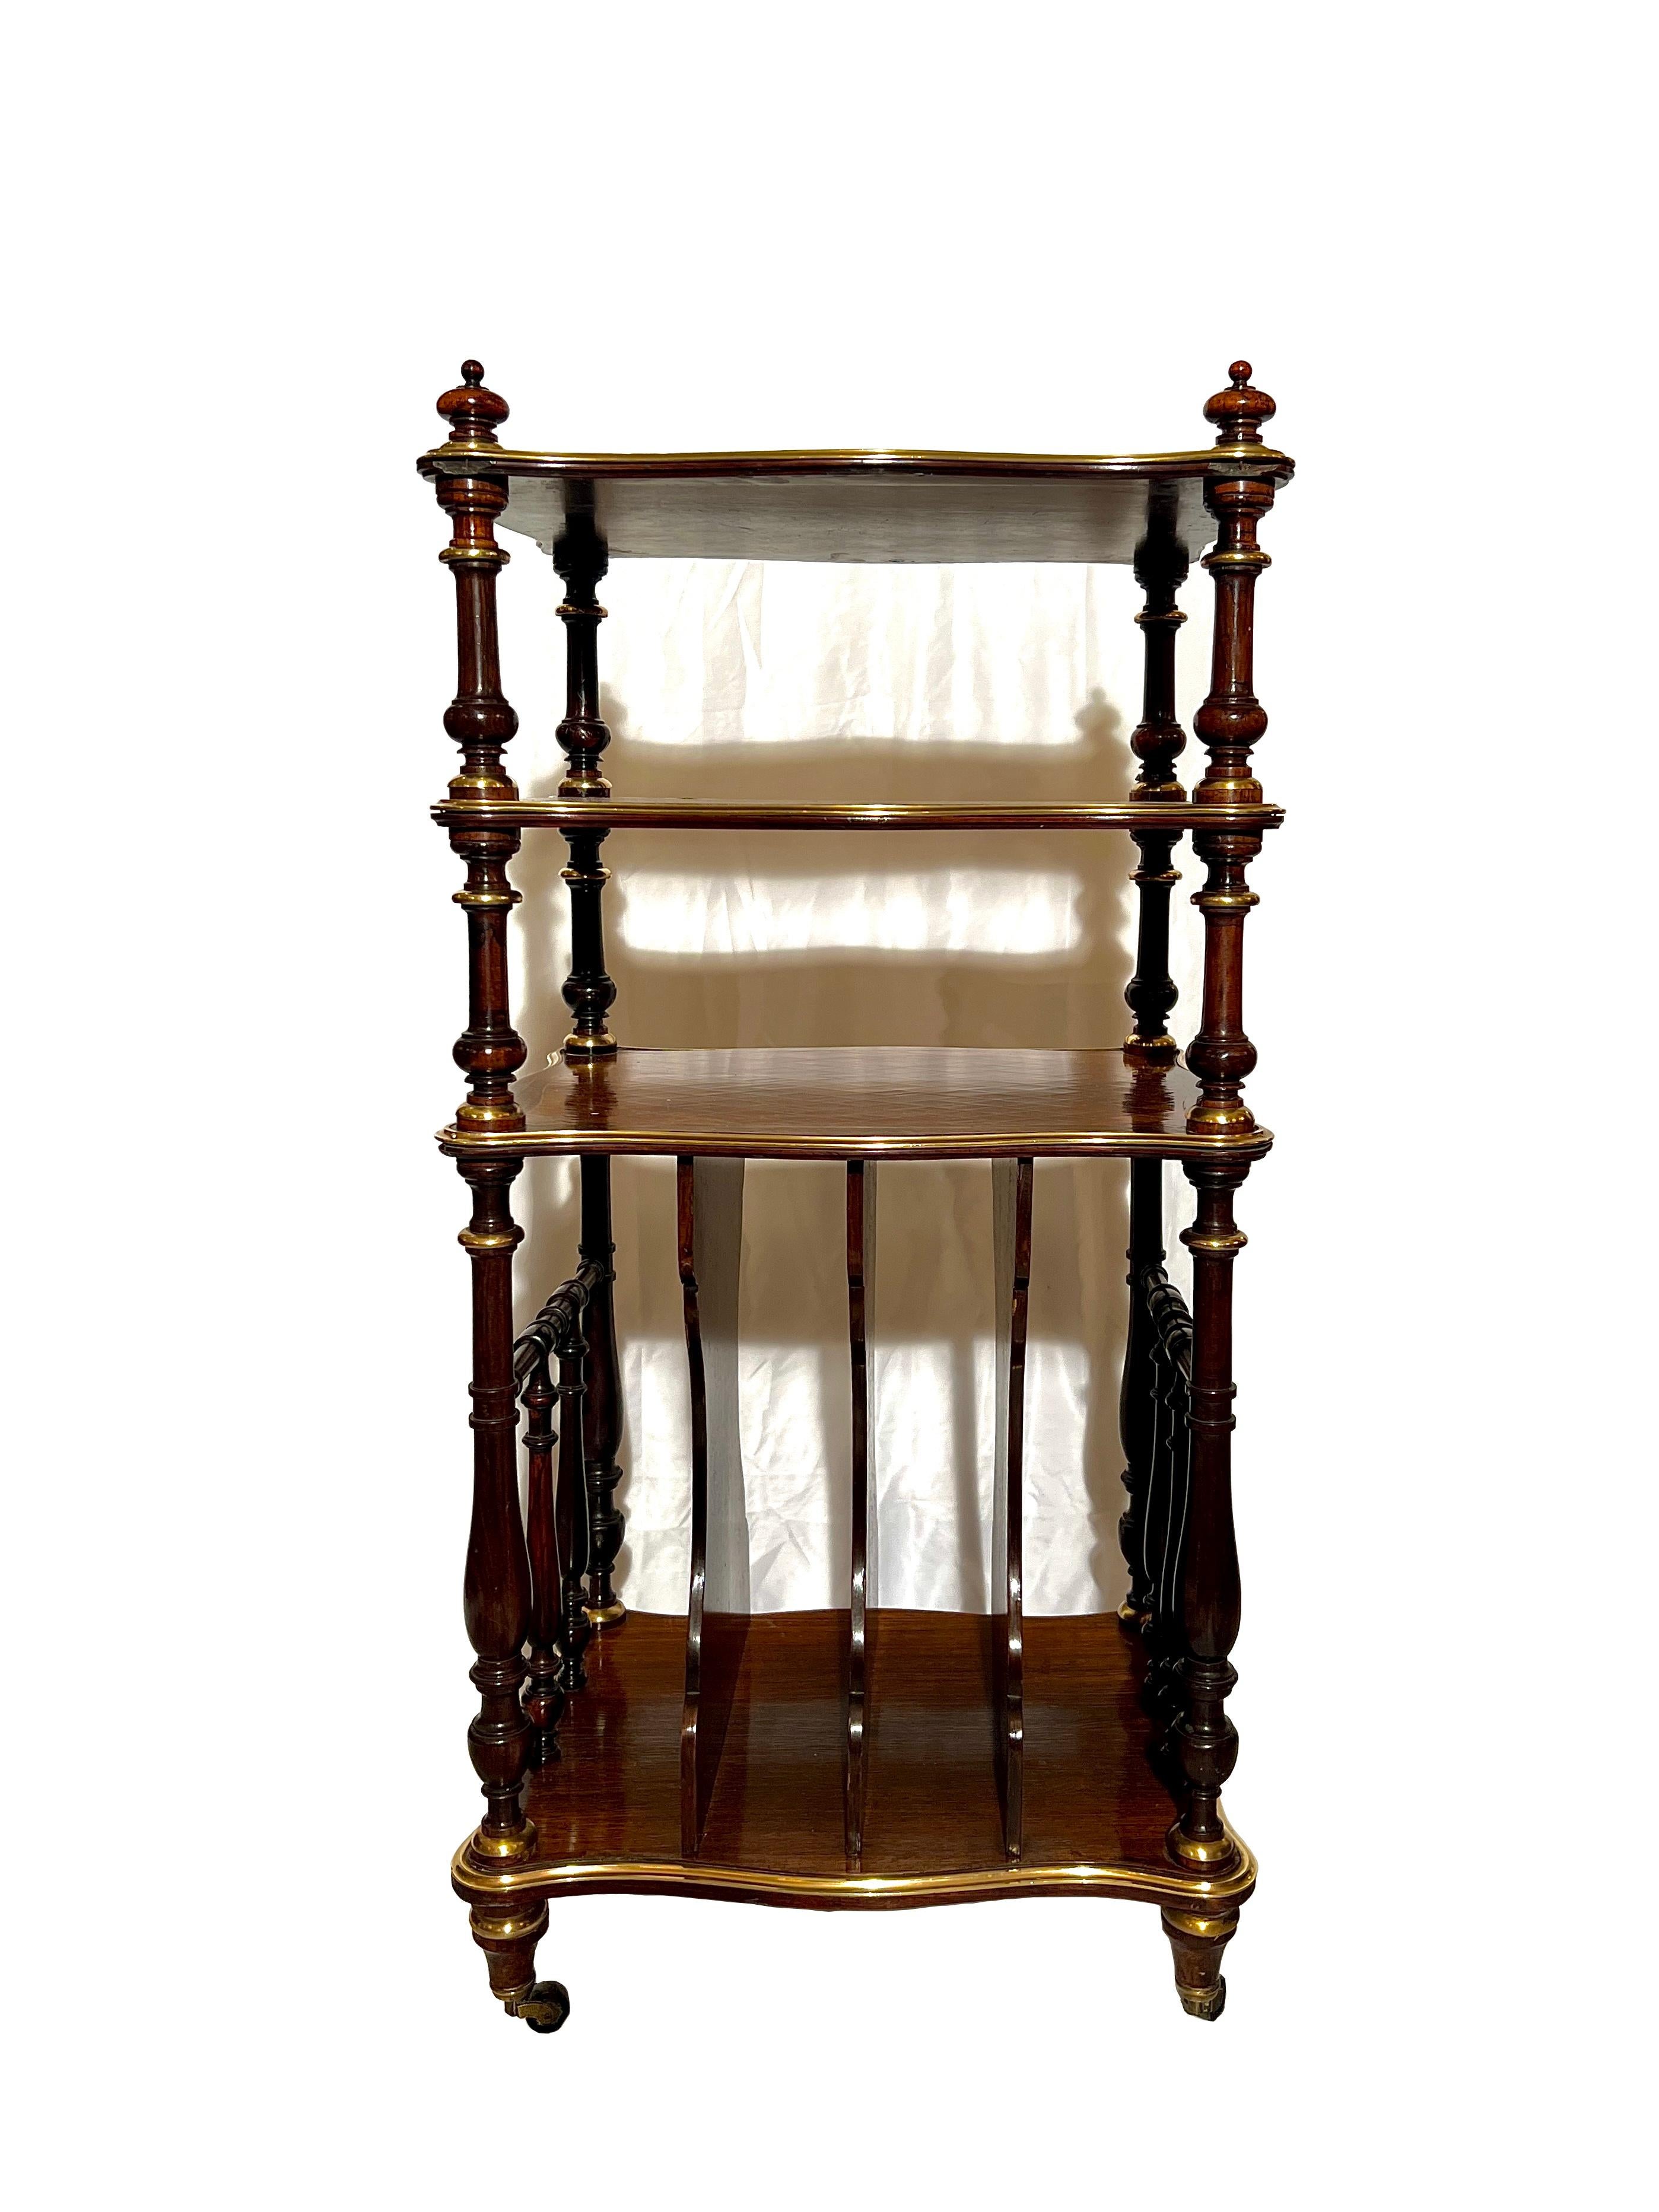 Antique English Rosewood Magazine Table or Canterbury on Casters, Circa 1860-1880.